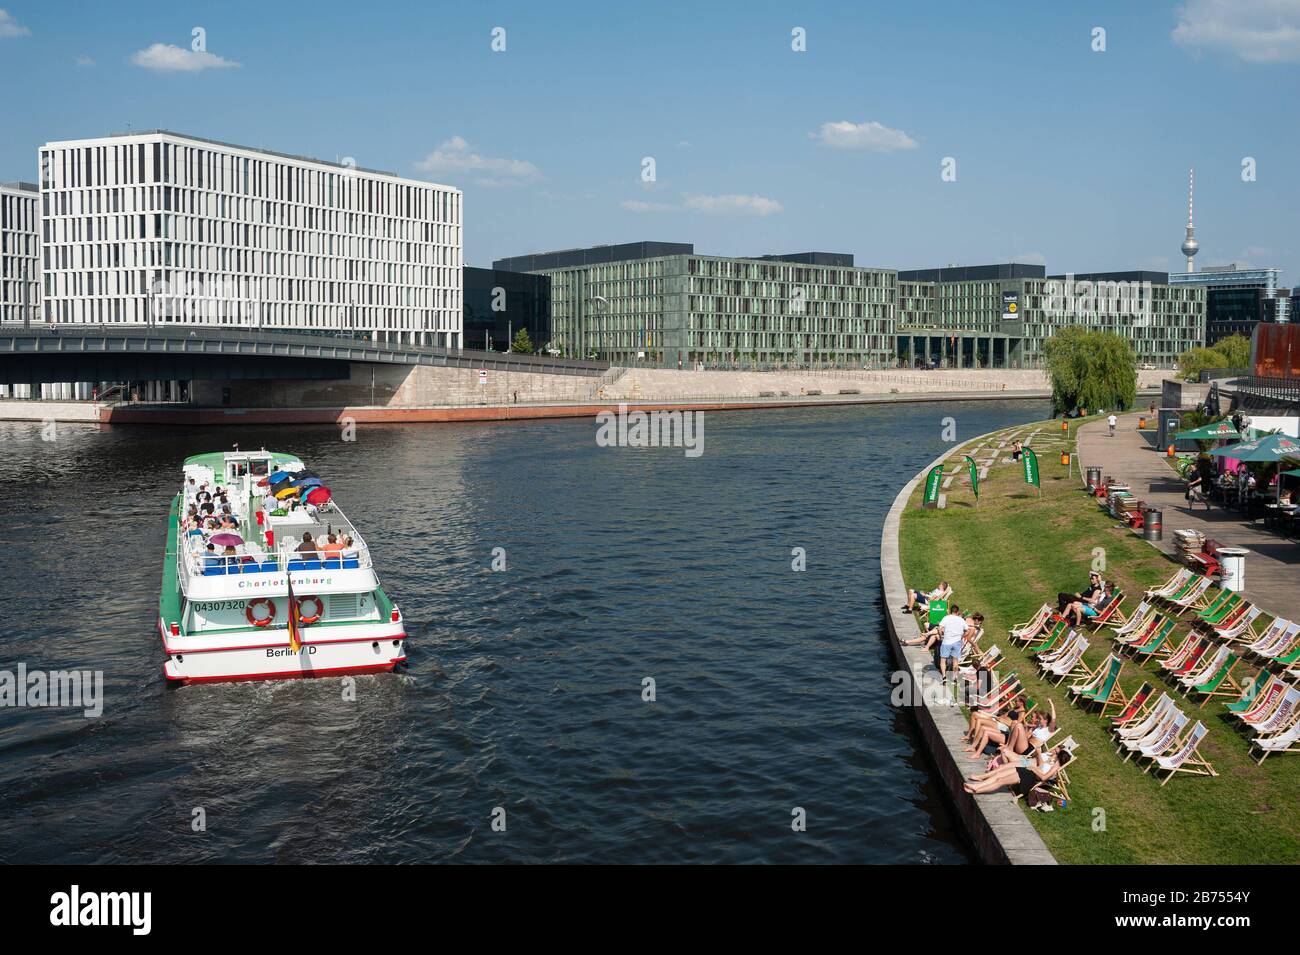 12.06.2019, Berlin, Germany, Europe - Beach bar Capital Beach at the Ludwig-Erhard-Ufer along the river Spree in the government quarter in Mitte. In the distance one can see the television tower at Alexanderplatz. [automated translation] Stock Photo